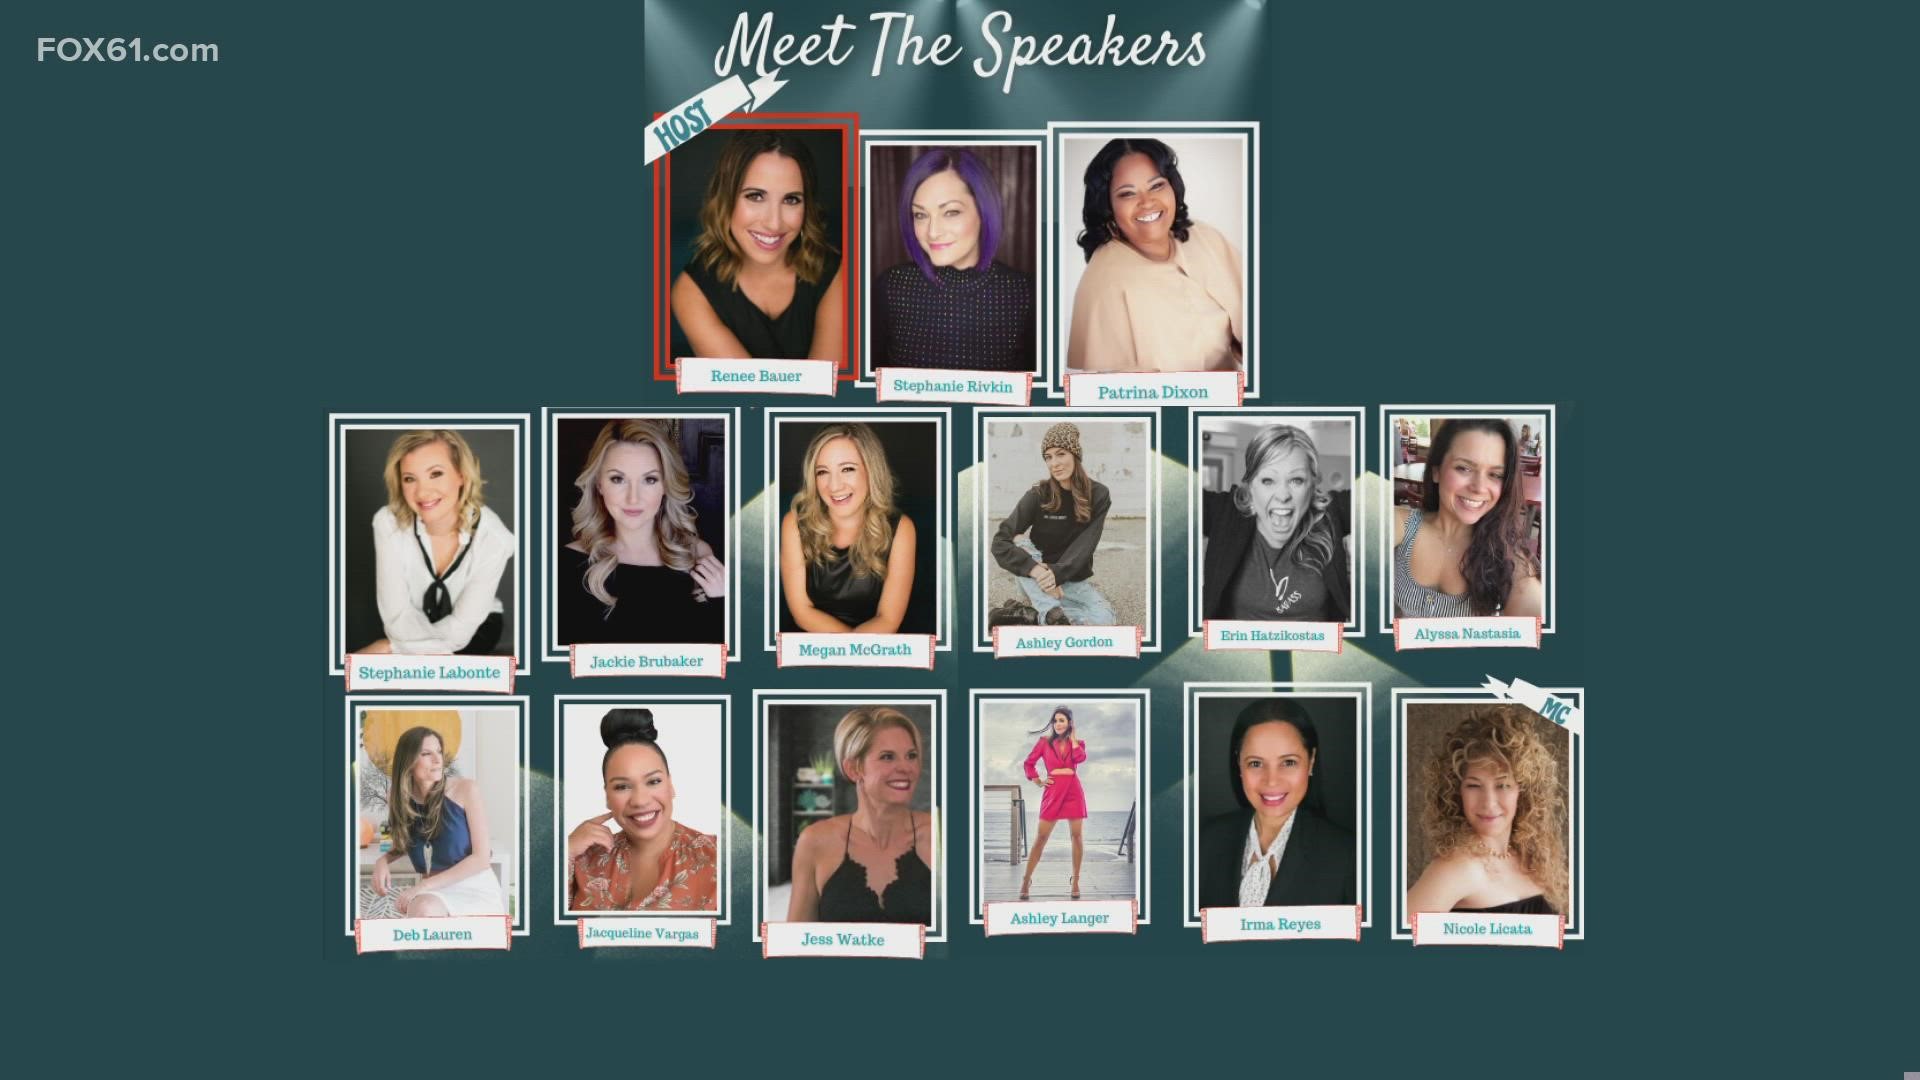 The 'She Who Wins' summit is to inspire and motivate women to level up their life!